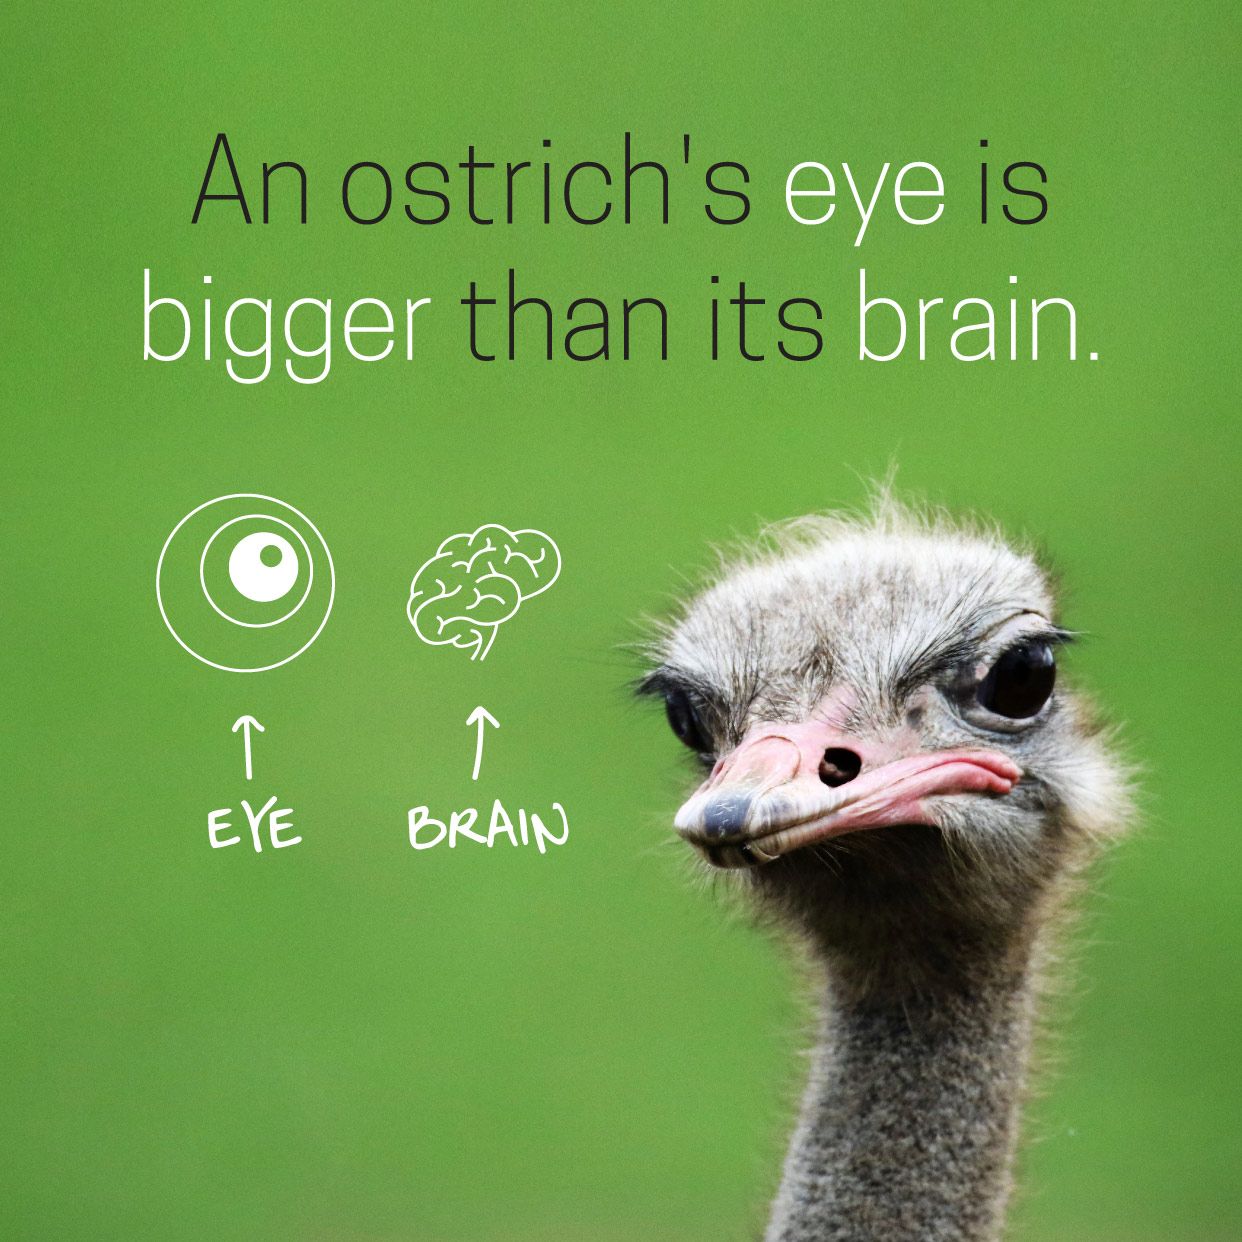 Is it true that an ostrich's eye is bigger than its brain?